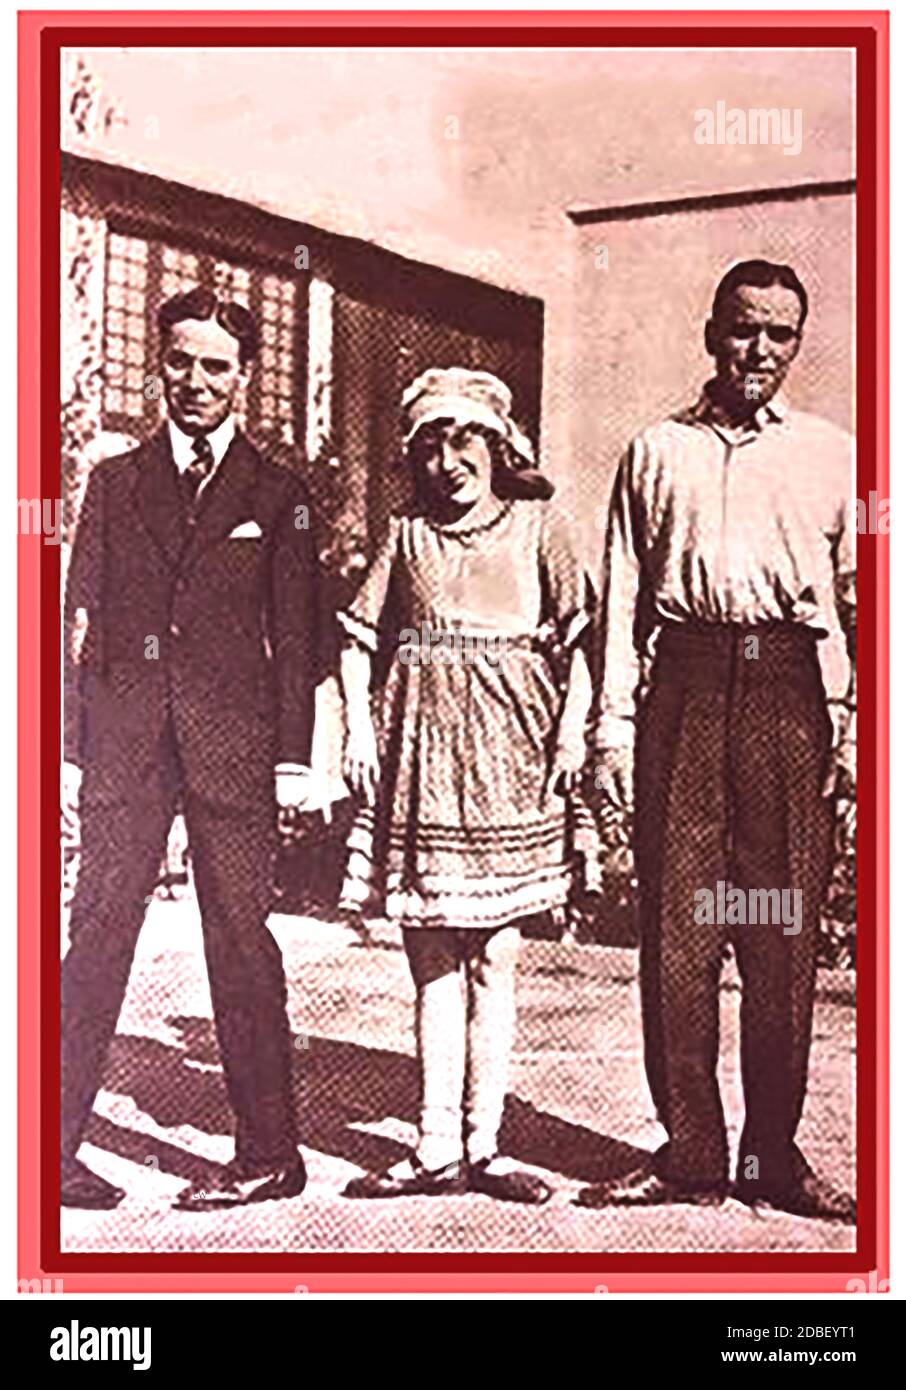 A rare and unusual  semi-informal portrait photograph  of film  personalities, Charles Chaplin ( Sir Charles Spencer Chaplin KBE  1889 –  1977)  English comic actor, filmmaker, and composer - Mary Pickford (1892–1979) ,Canadian motion picture actress, producer, and writer and her husband  -  Douglas Fairbanks (Douglas Elton Fairbanks - born Douglas Elton Thomas Ullman; 1883 –  1939)  American actor, screenwriter, director, and producer.   ===== Film director David Wark Griffith, Charlie Chaplin, Mary Pickford, and Douglas Fairbanks, formed United Artists in  1919.  (From an old postcard) Stock Photo